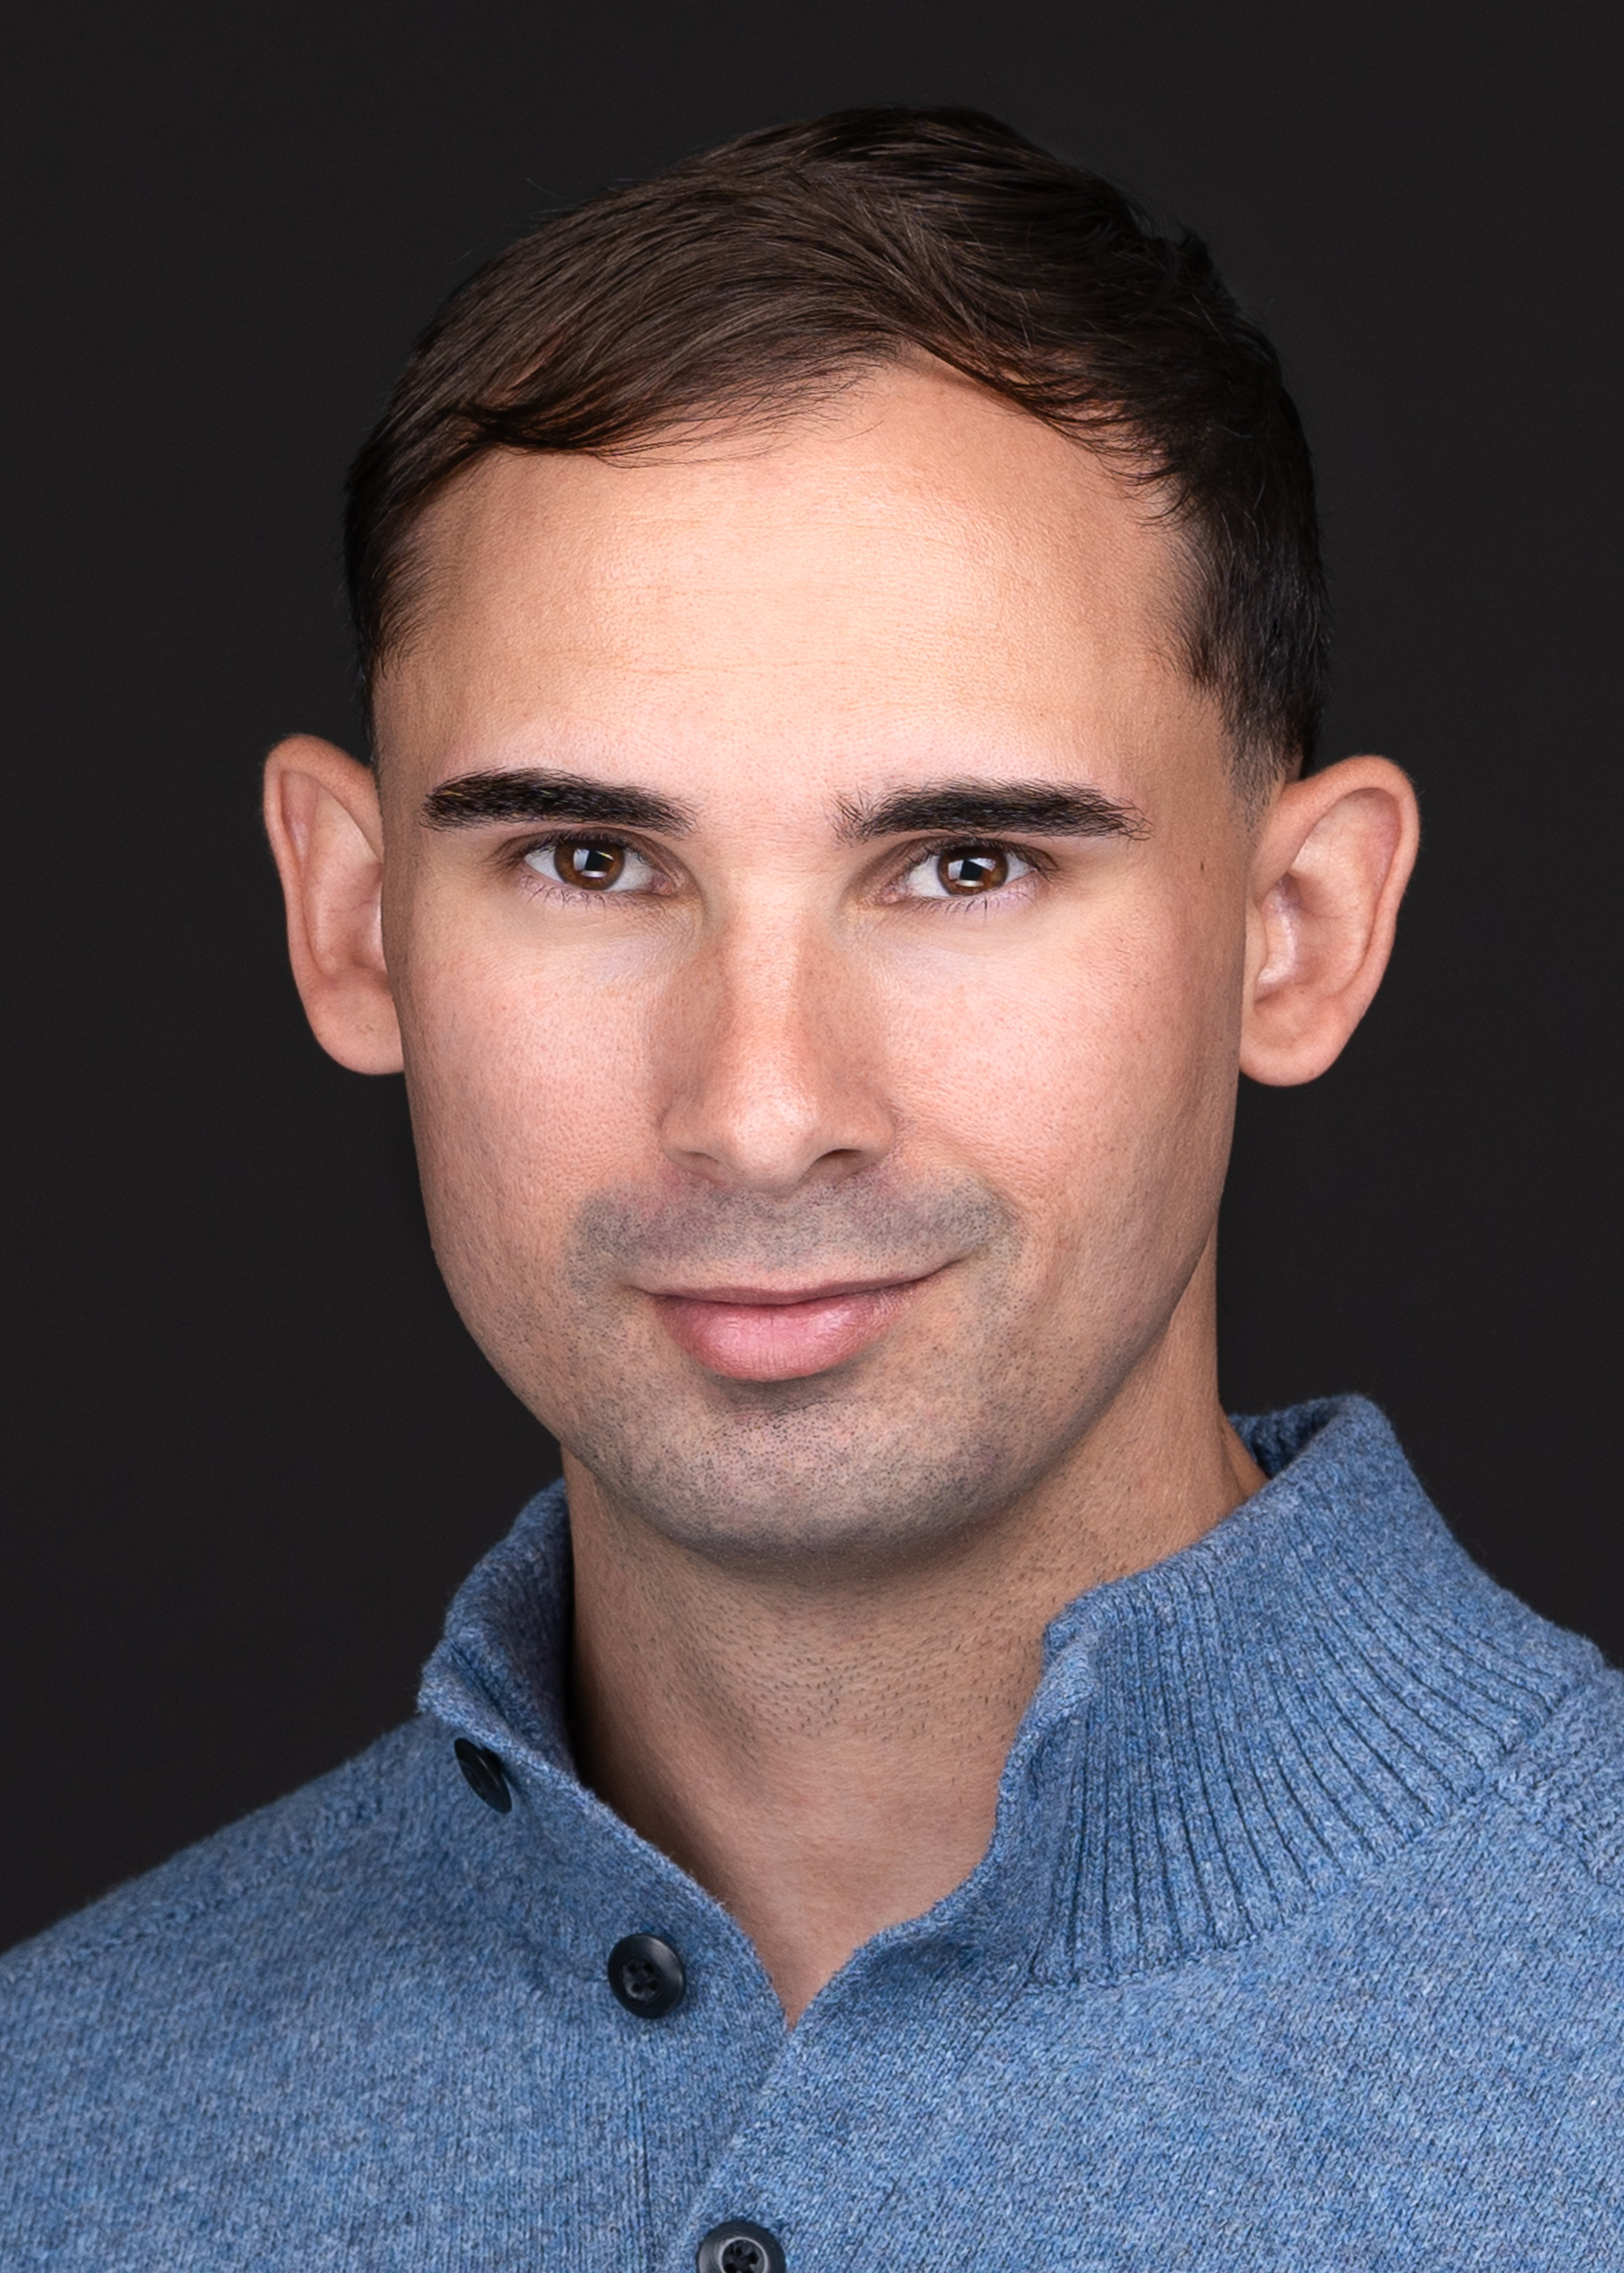 A professional headshot photographer captures a man with brown eyes wearing a blue henley sweater for his business headshot.